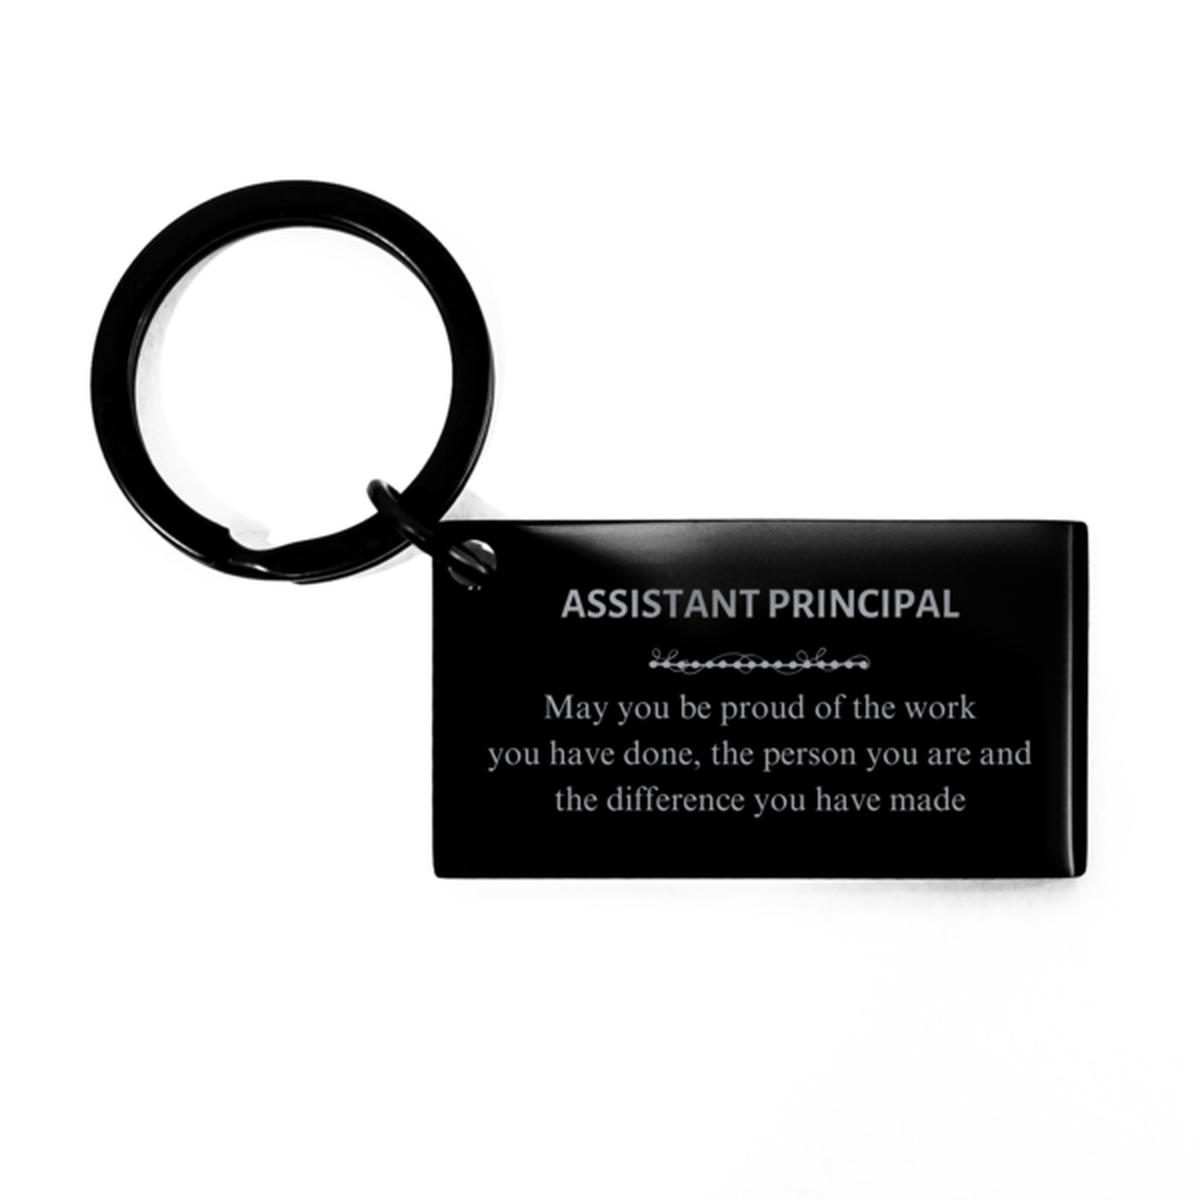 Concierge May you be proud of the work you have done, Retirement Assistant Principal Keychain for Colleague Appreciation Gifts Amazing for Assistant Principal